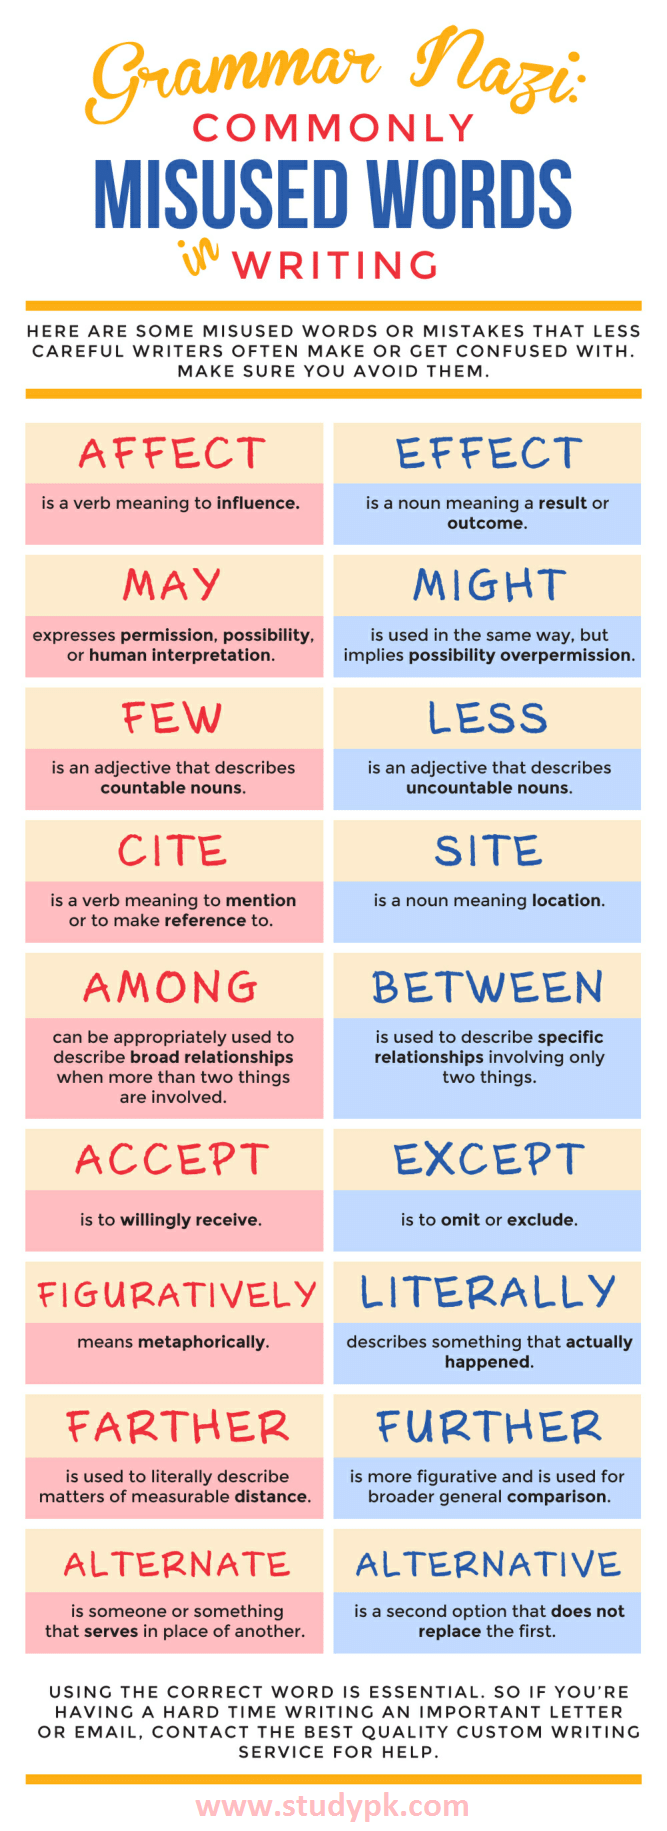 Grammar Nazi: Commonly Misused Words in Writing